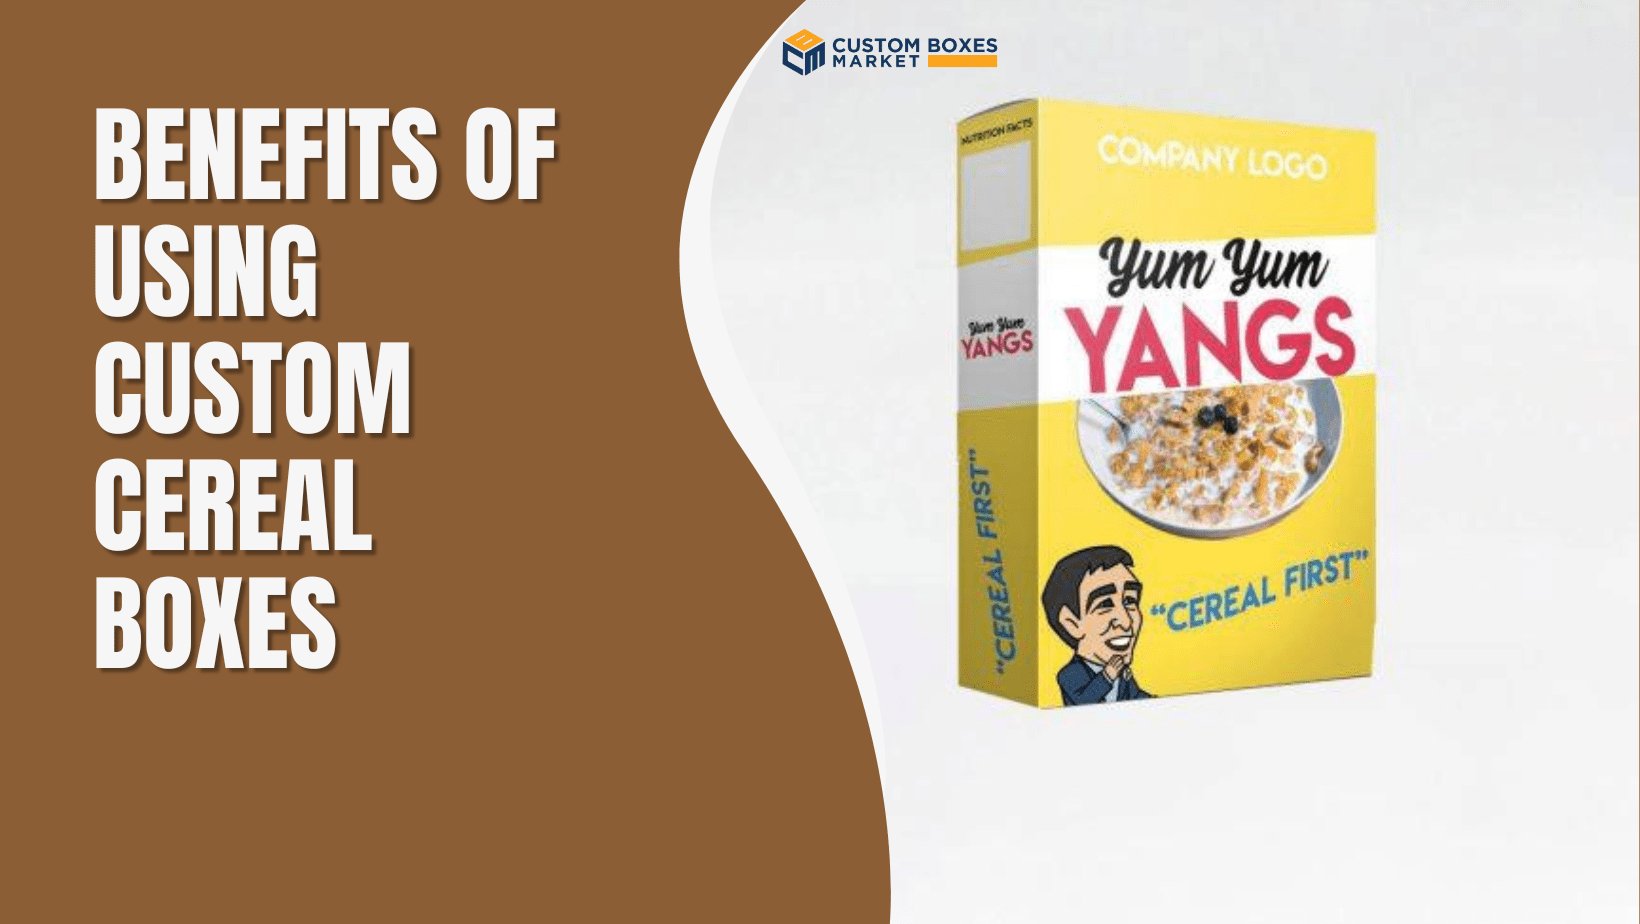 Benefits of Using Custom Cereal Boxes